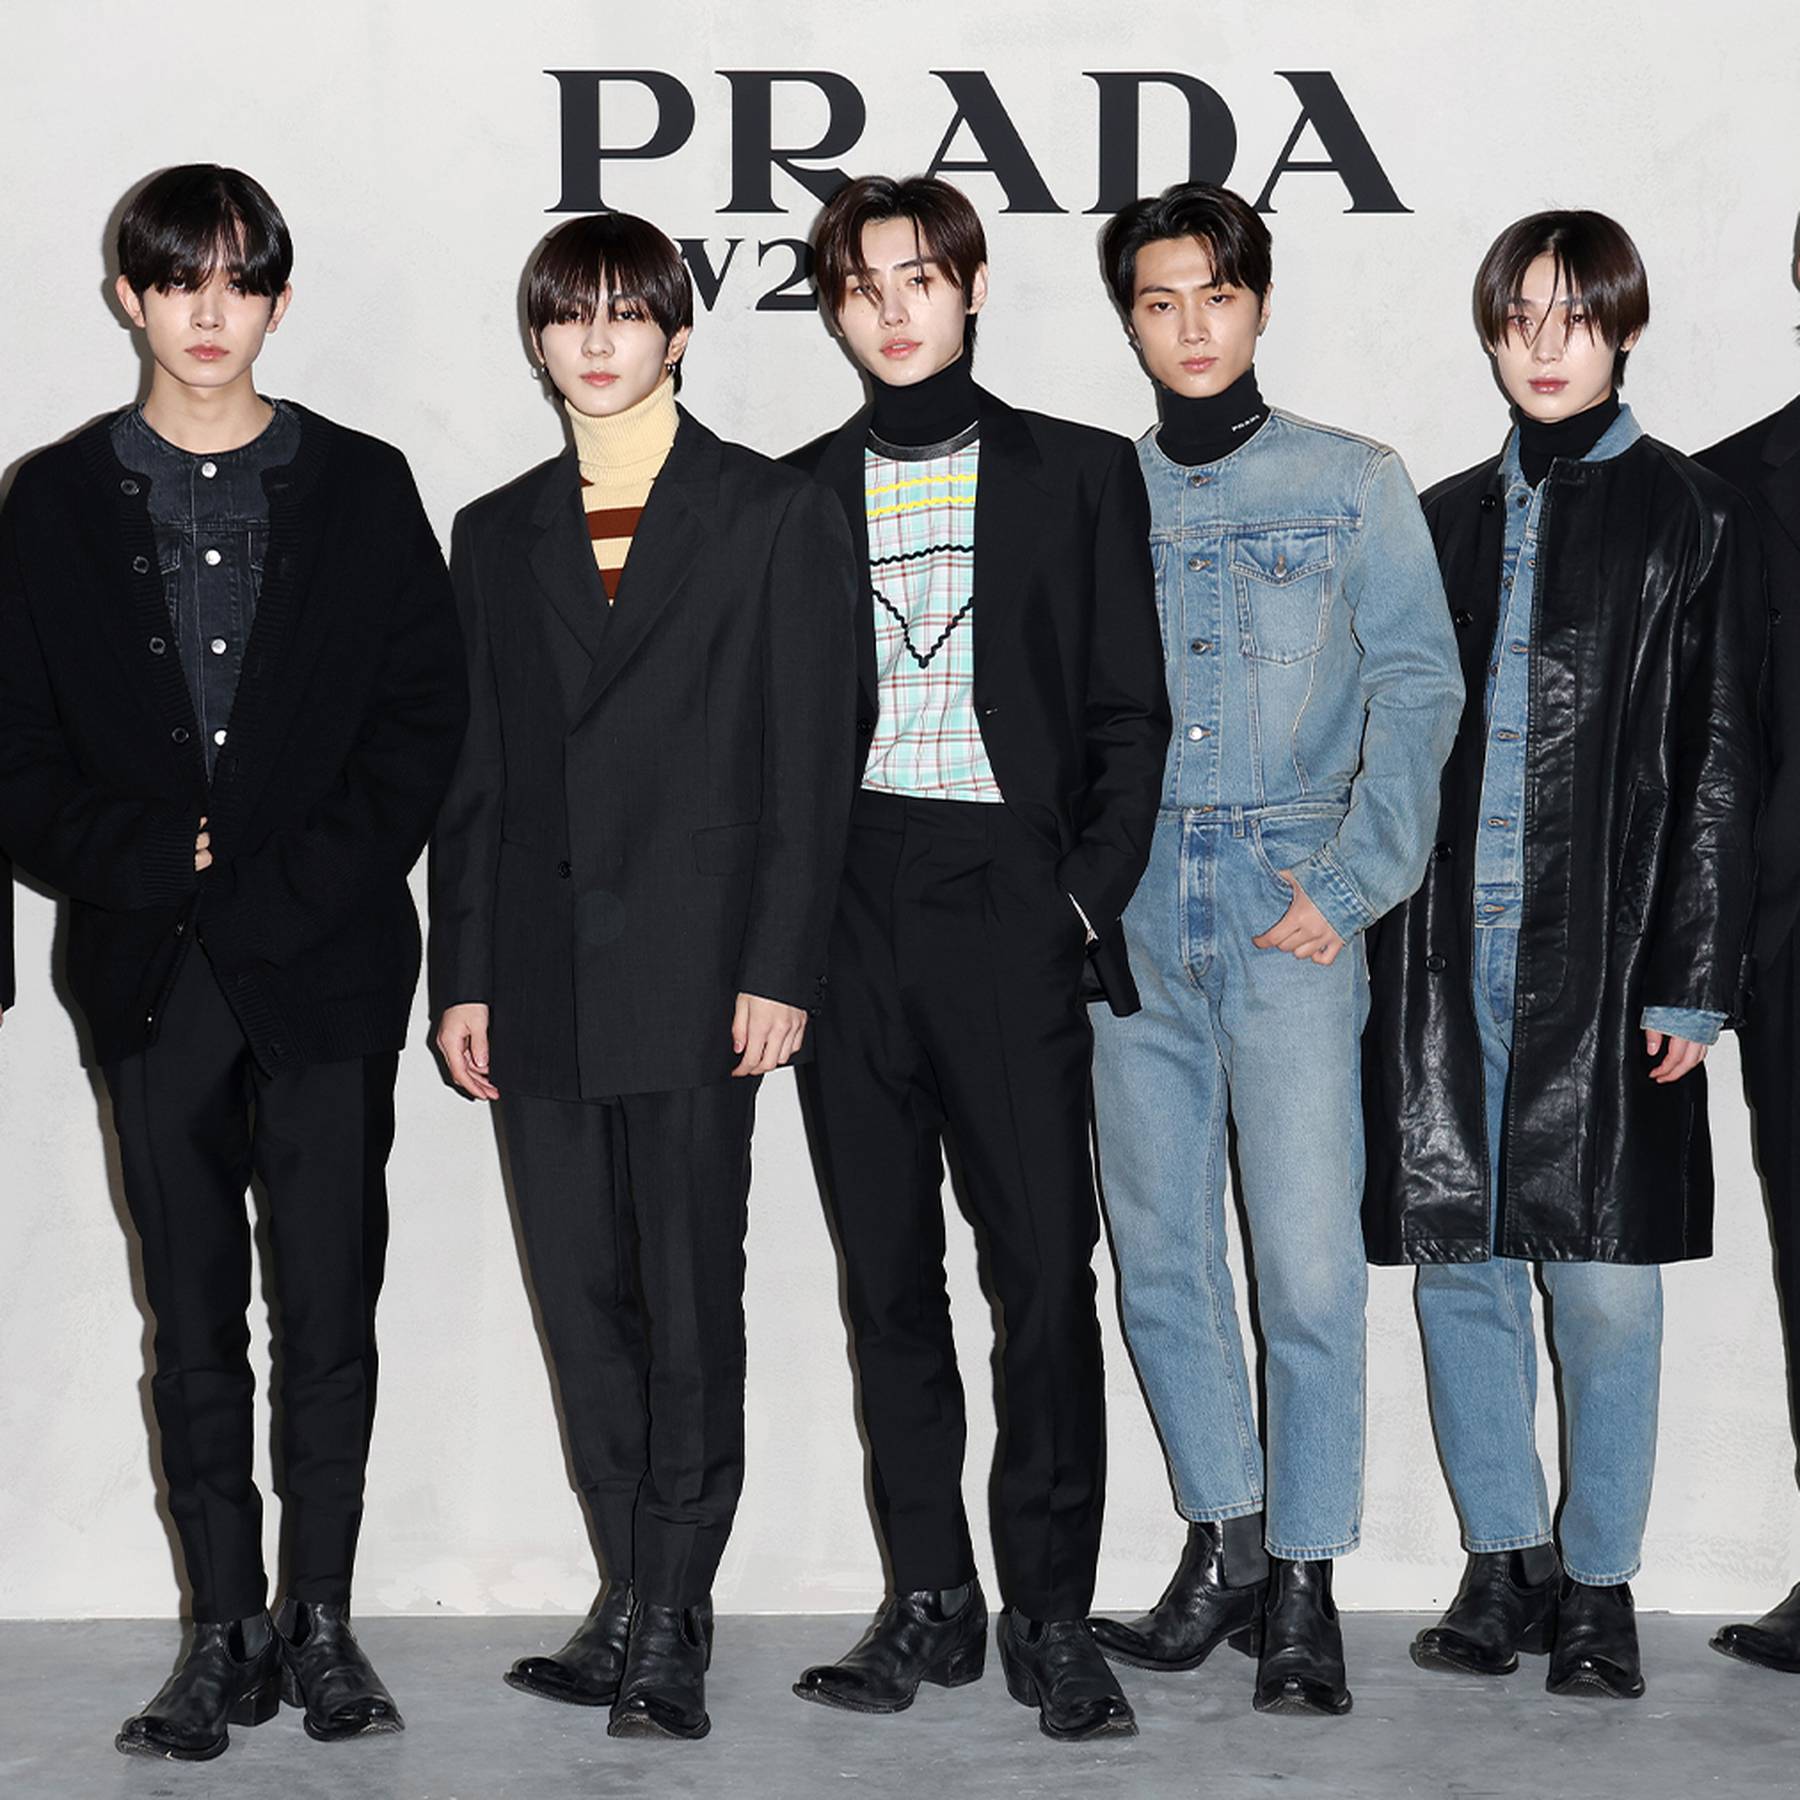 7 Looks We Love From Louis Vuitton's Fall/Winter 2021 Men's Spin-Off Show  Featuring BTS